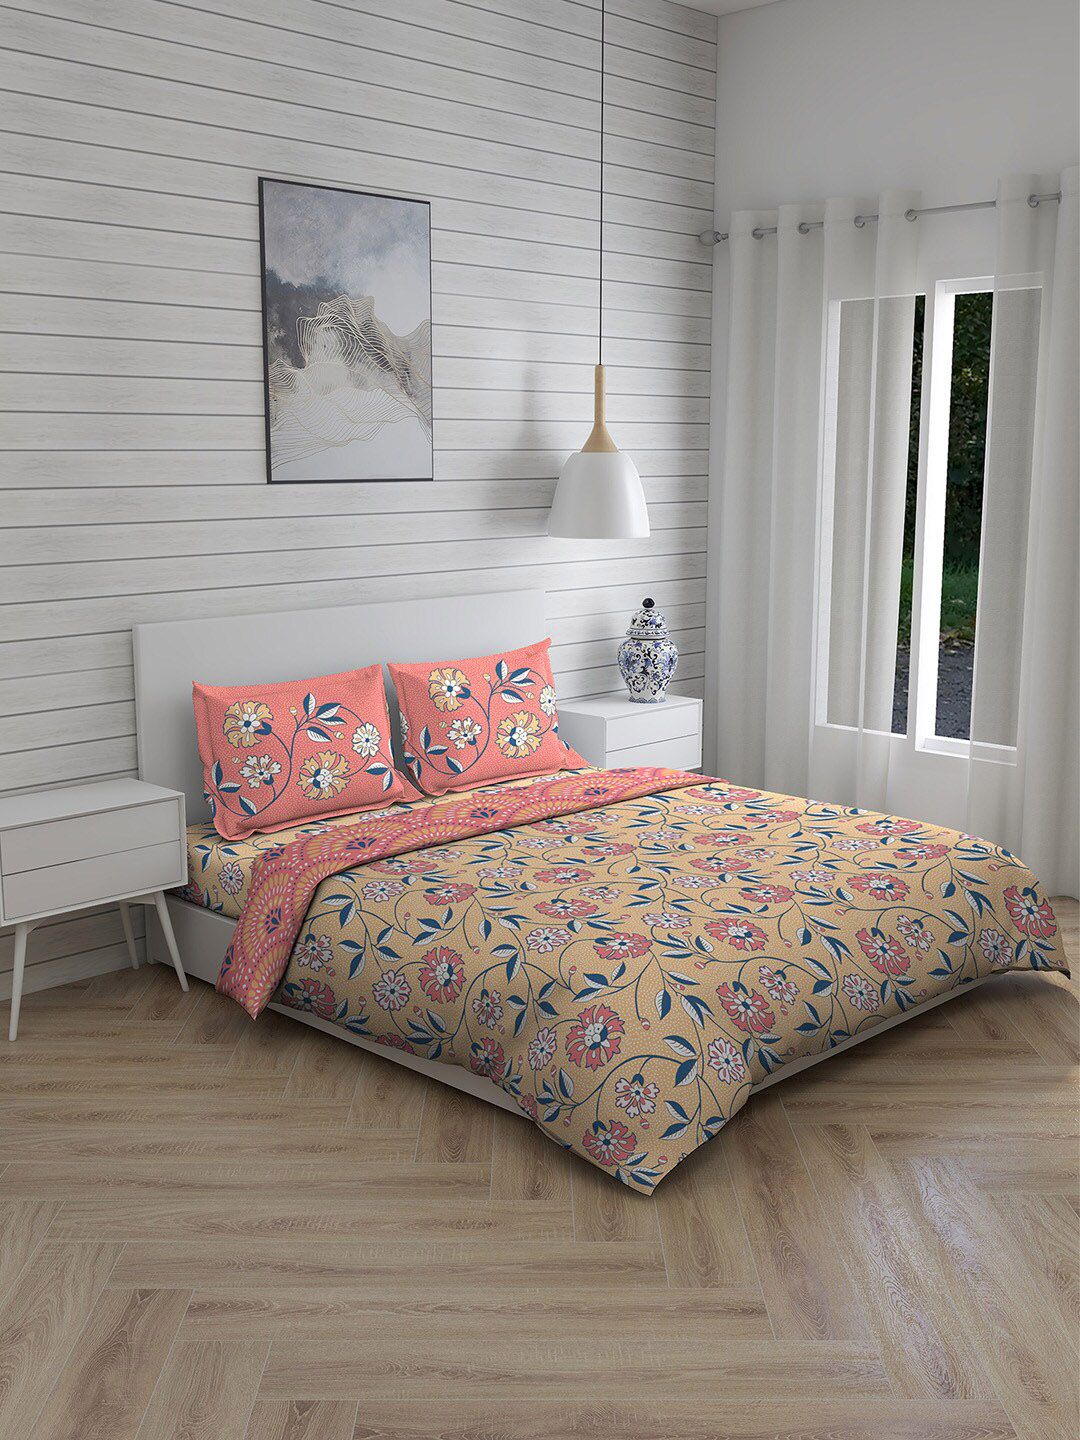 Boutique Living India Pink & Yellow Floral Printed Cotton Double Queen Bedding Set Price in India